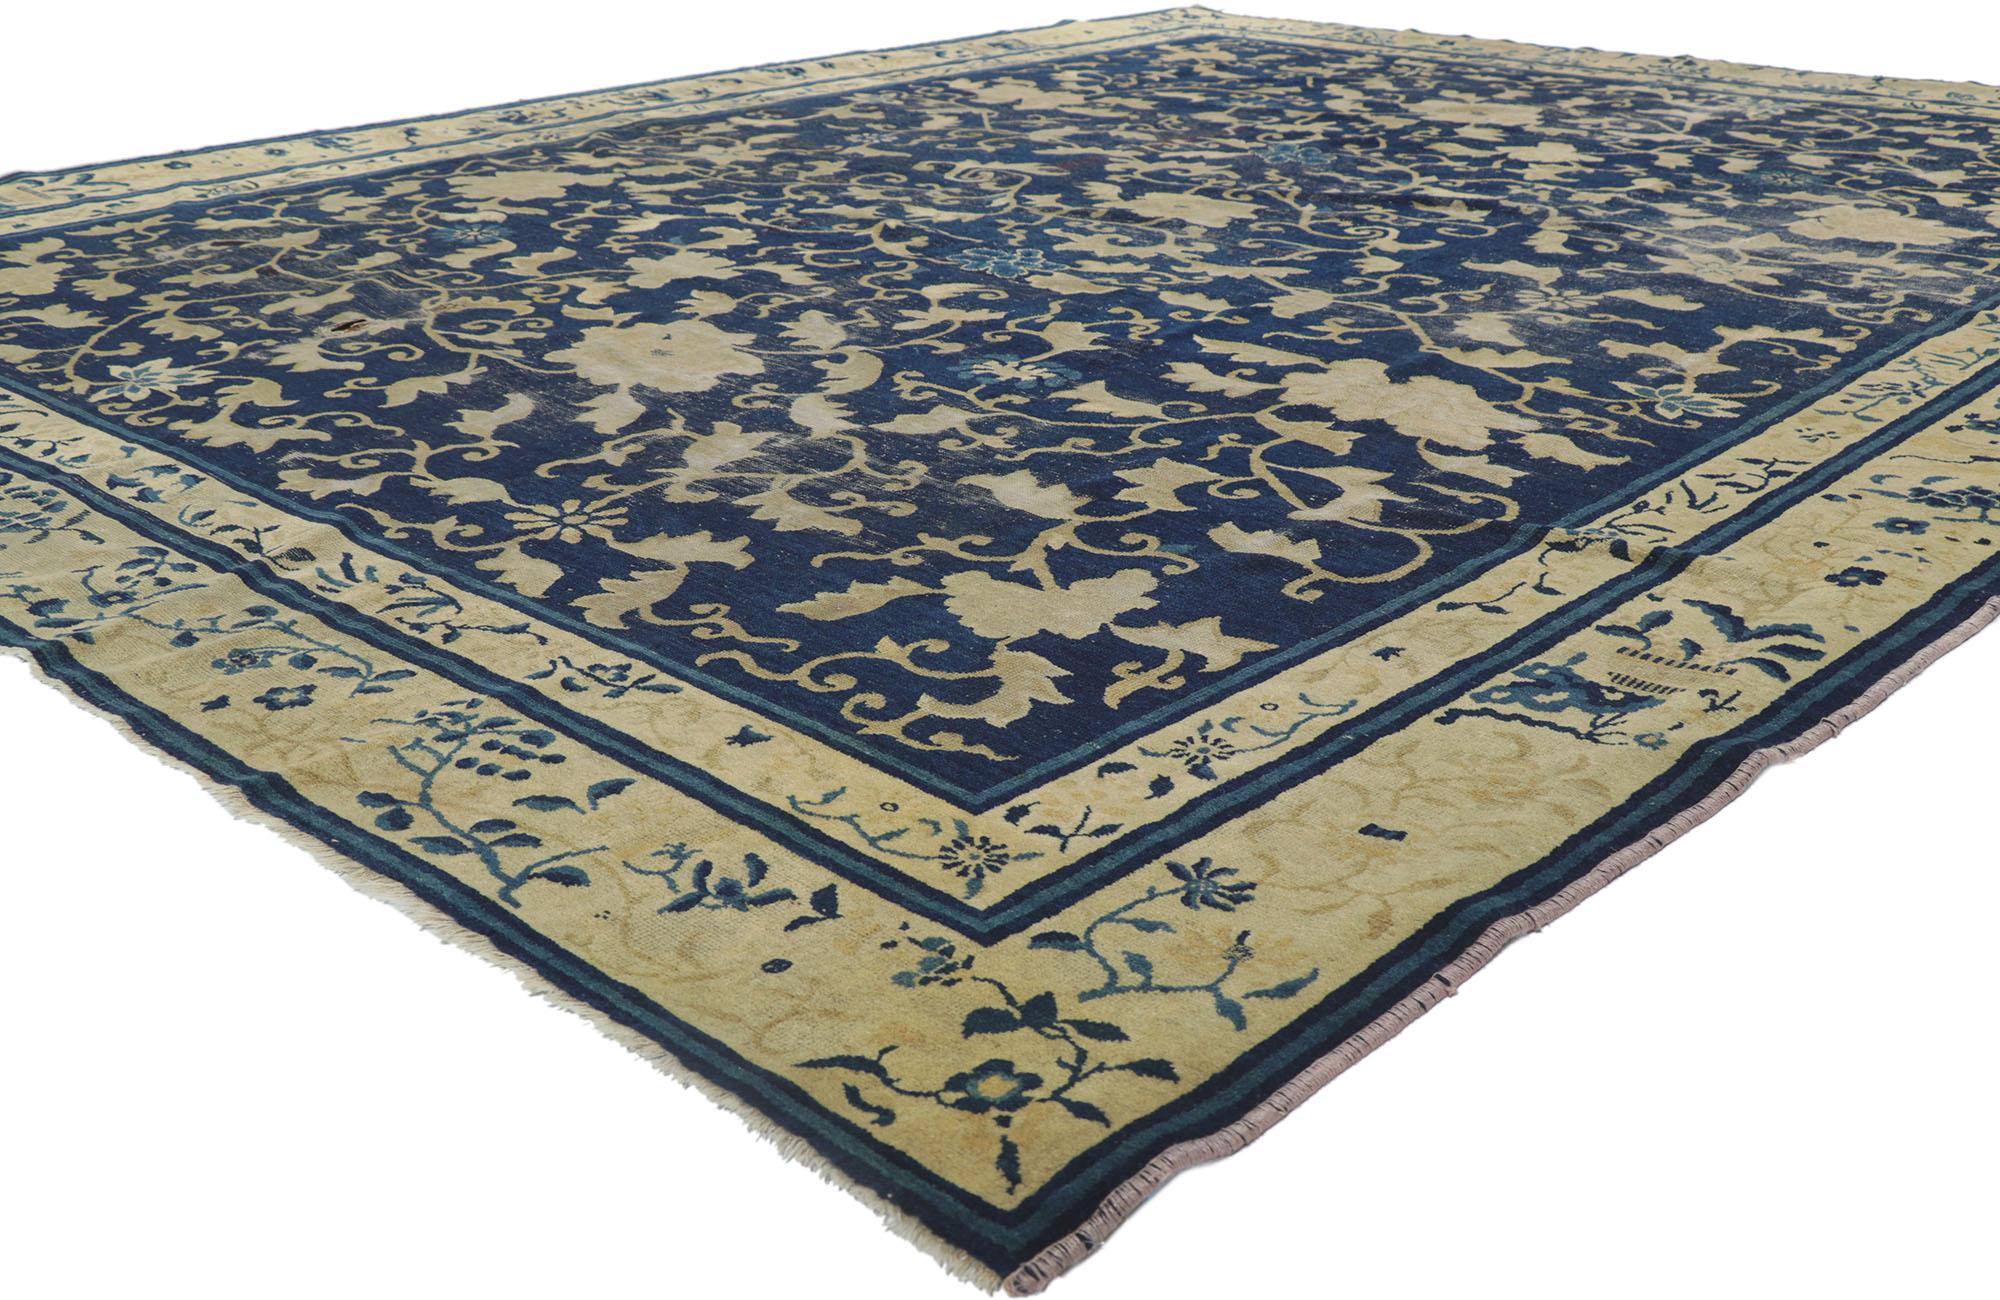 78174 Distressed Antique Chinese Peking rug, 08'08 x 11'00. Effortless beauty and understated elegance, this hand-knotted wool distressed antique Peking rug beautifully embodies rustic Chinoiserie style. A rustic traditional scene composed of